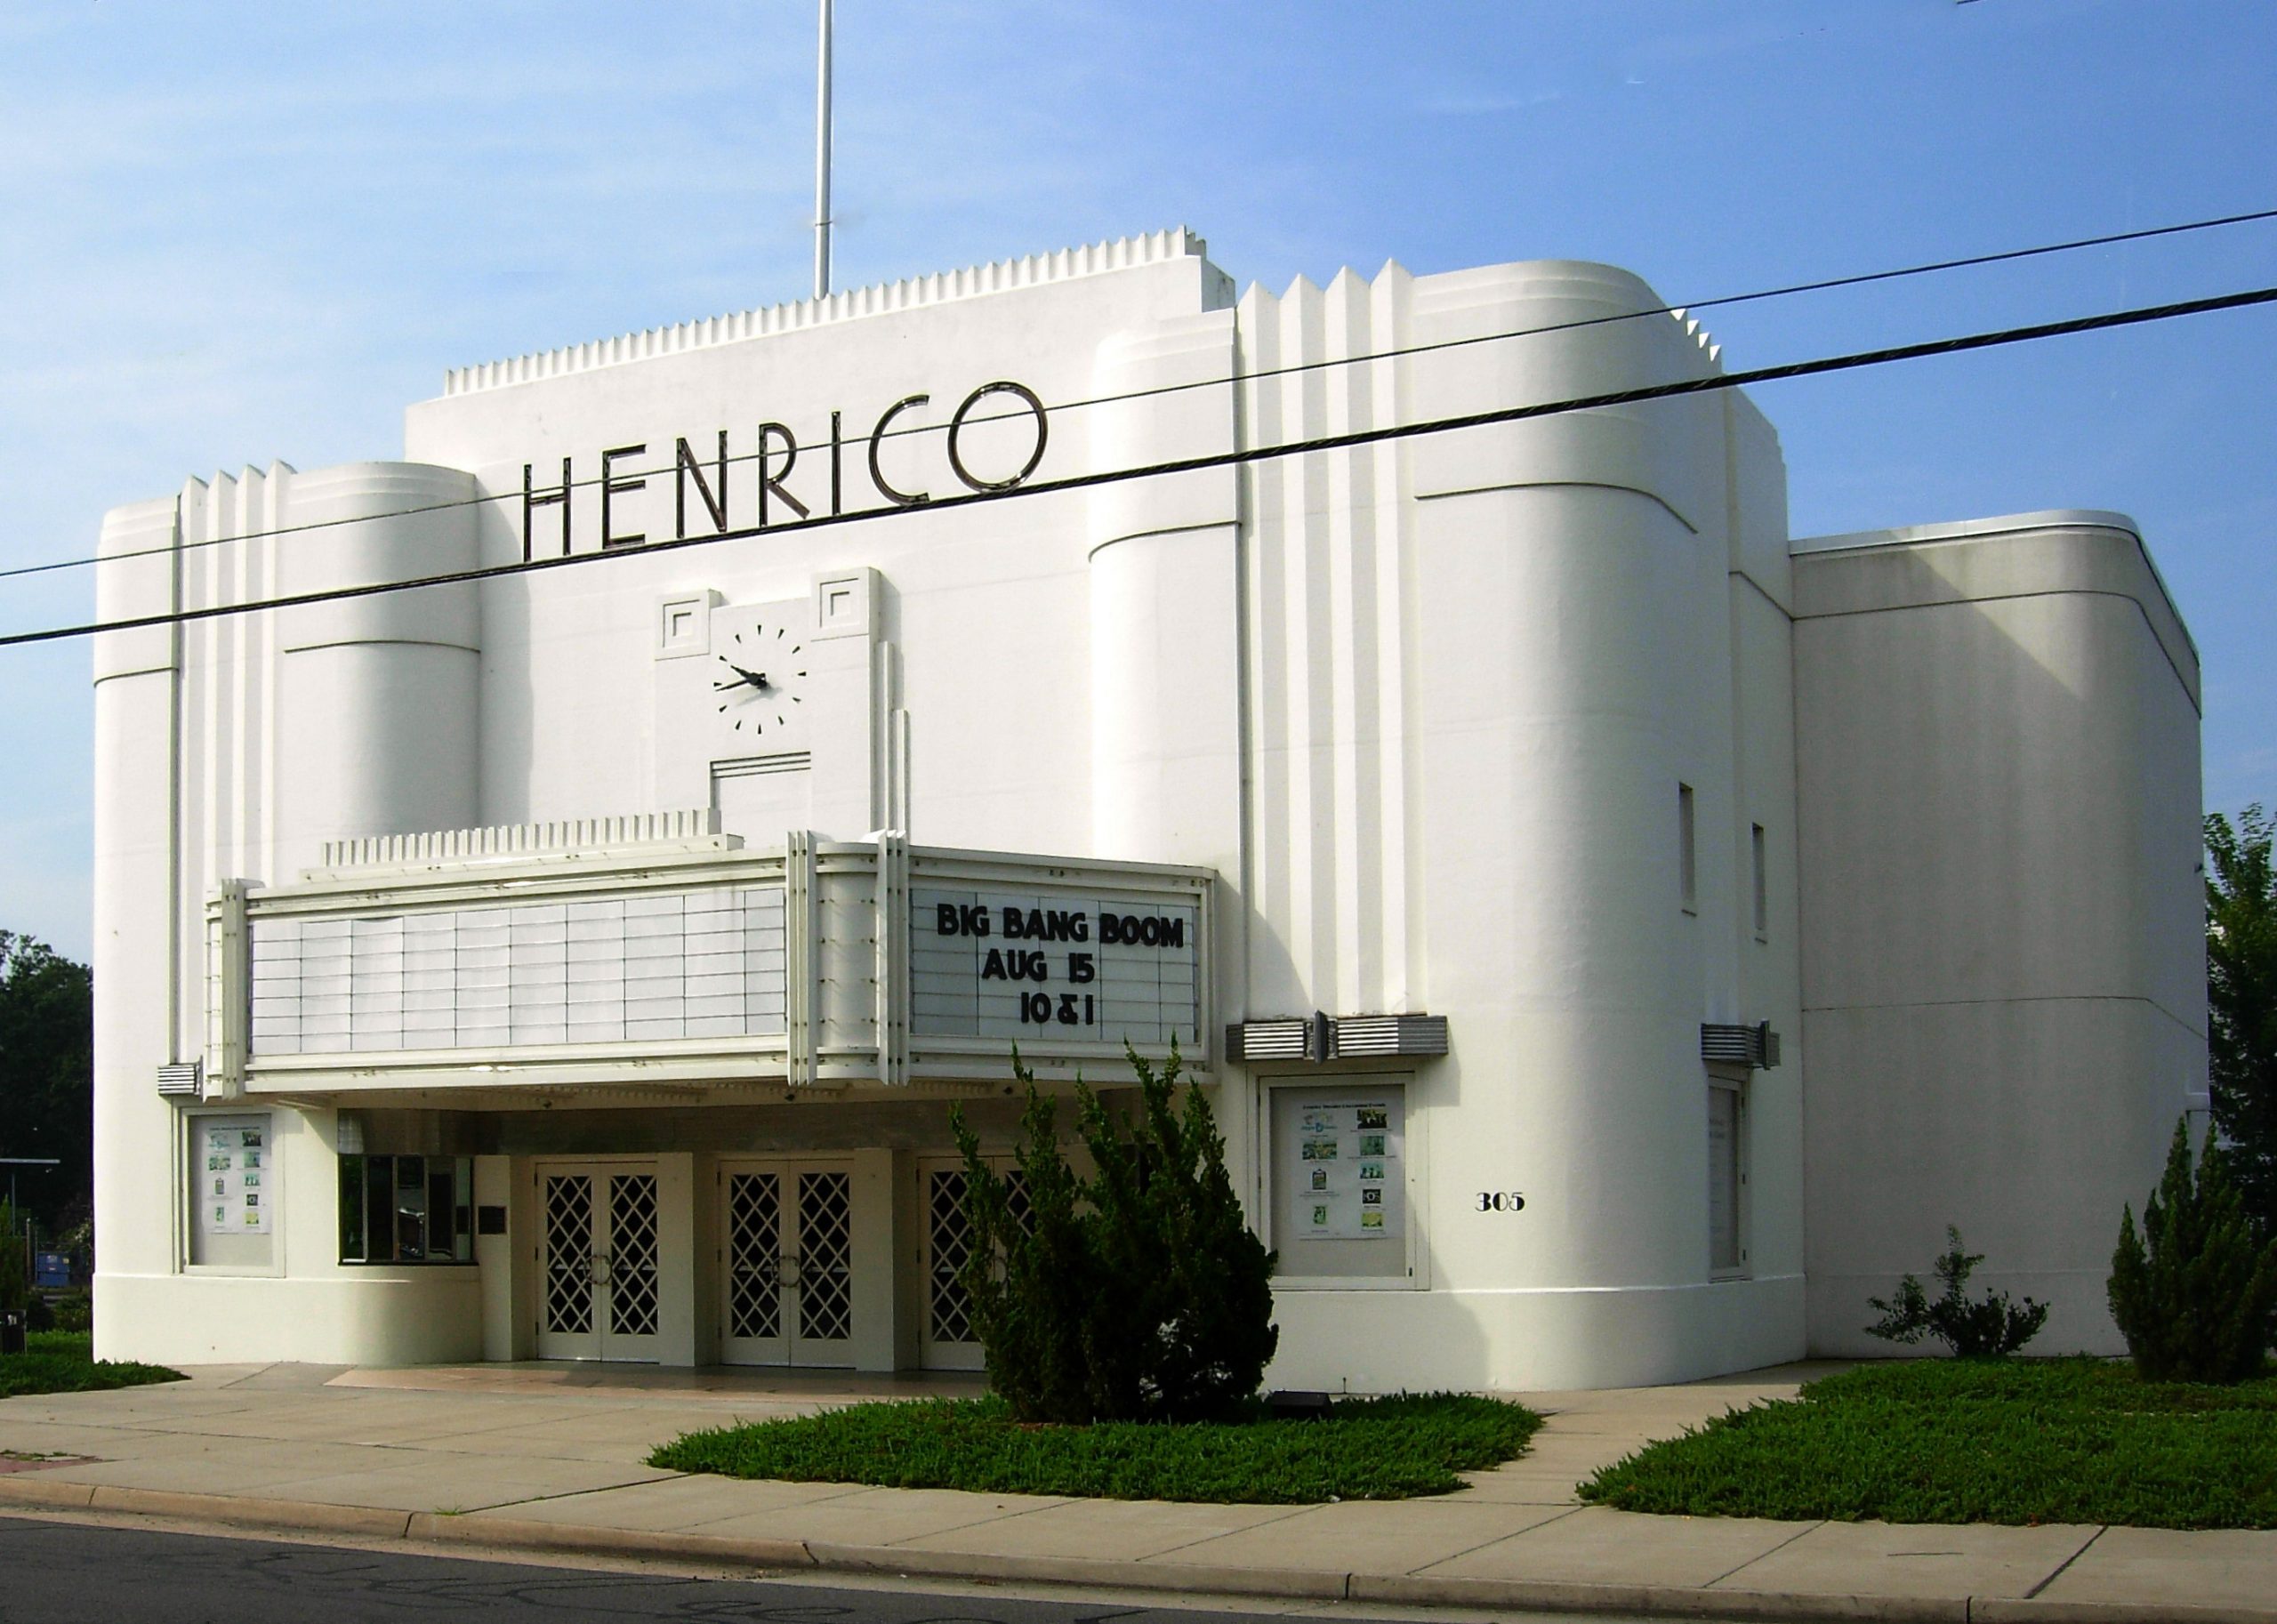 043-0287_Henrico_Theater_2012_exterior_front_street_view_VLR_Online-scaled